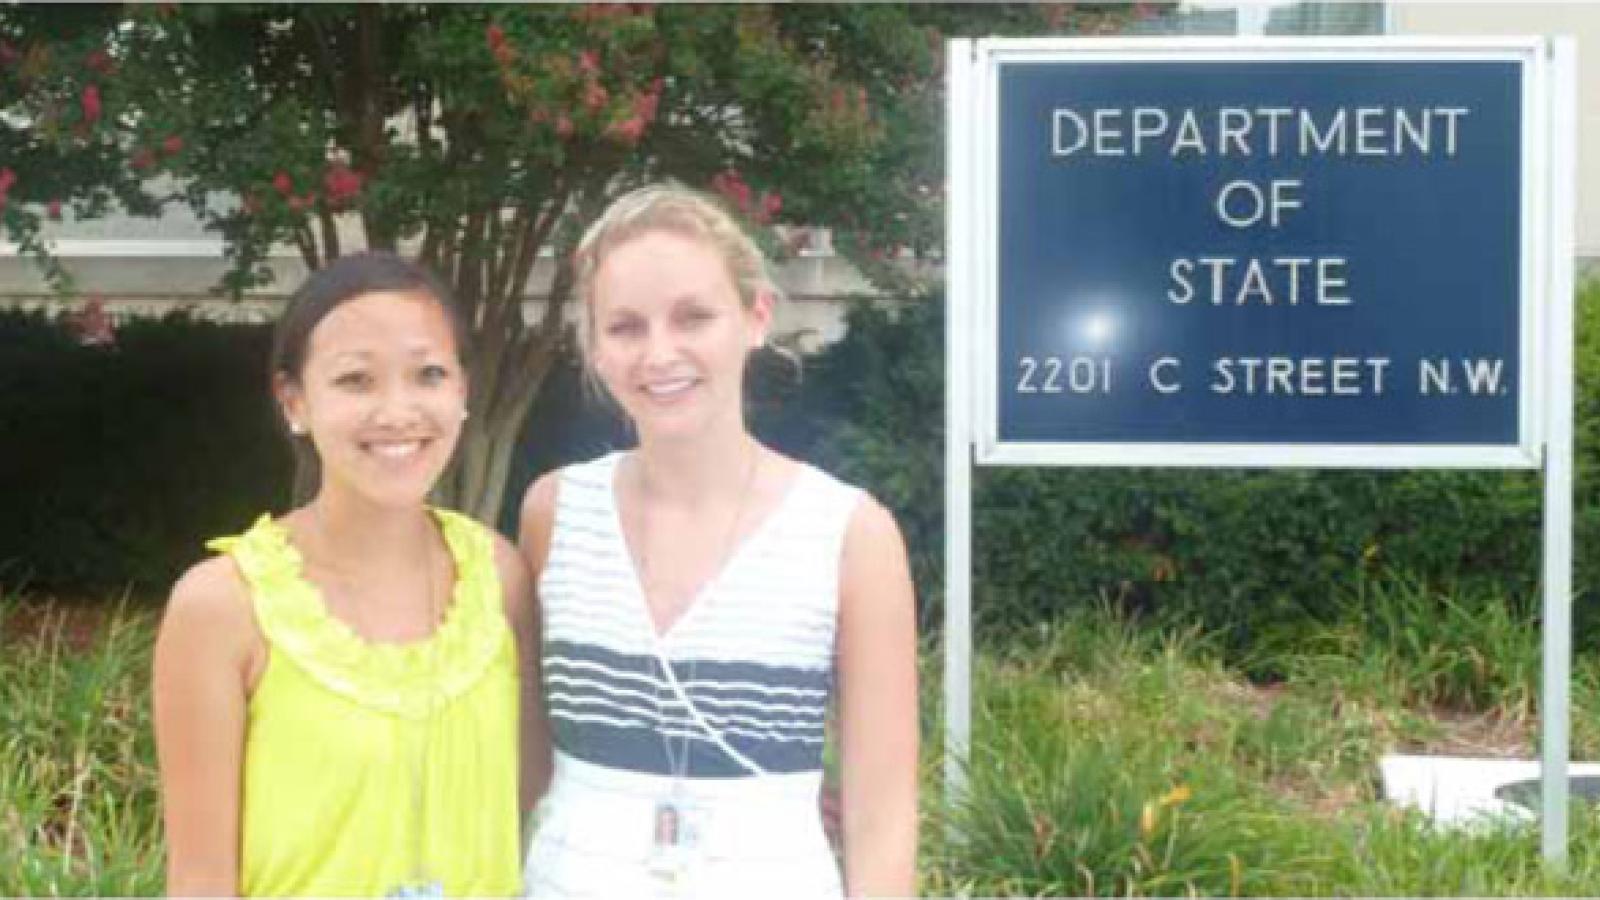 Tess Eckstein (right) pictured with a co-worker while interning for the State Department.